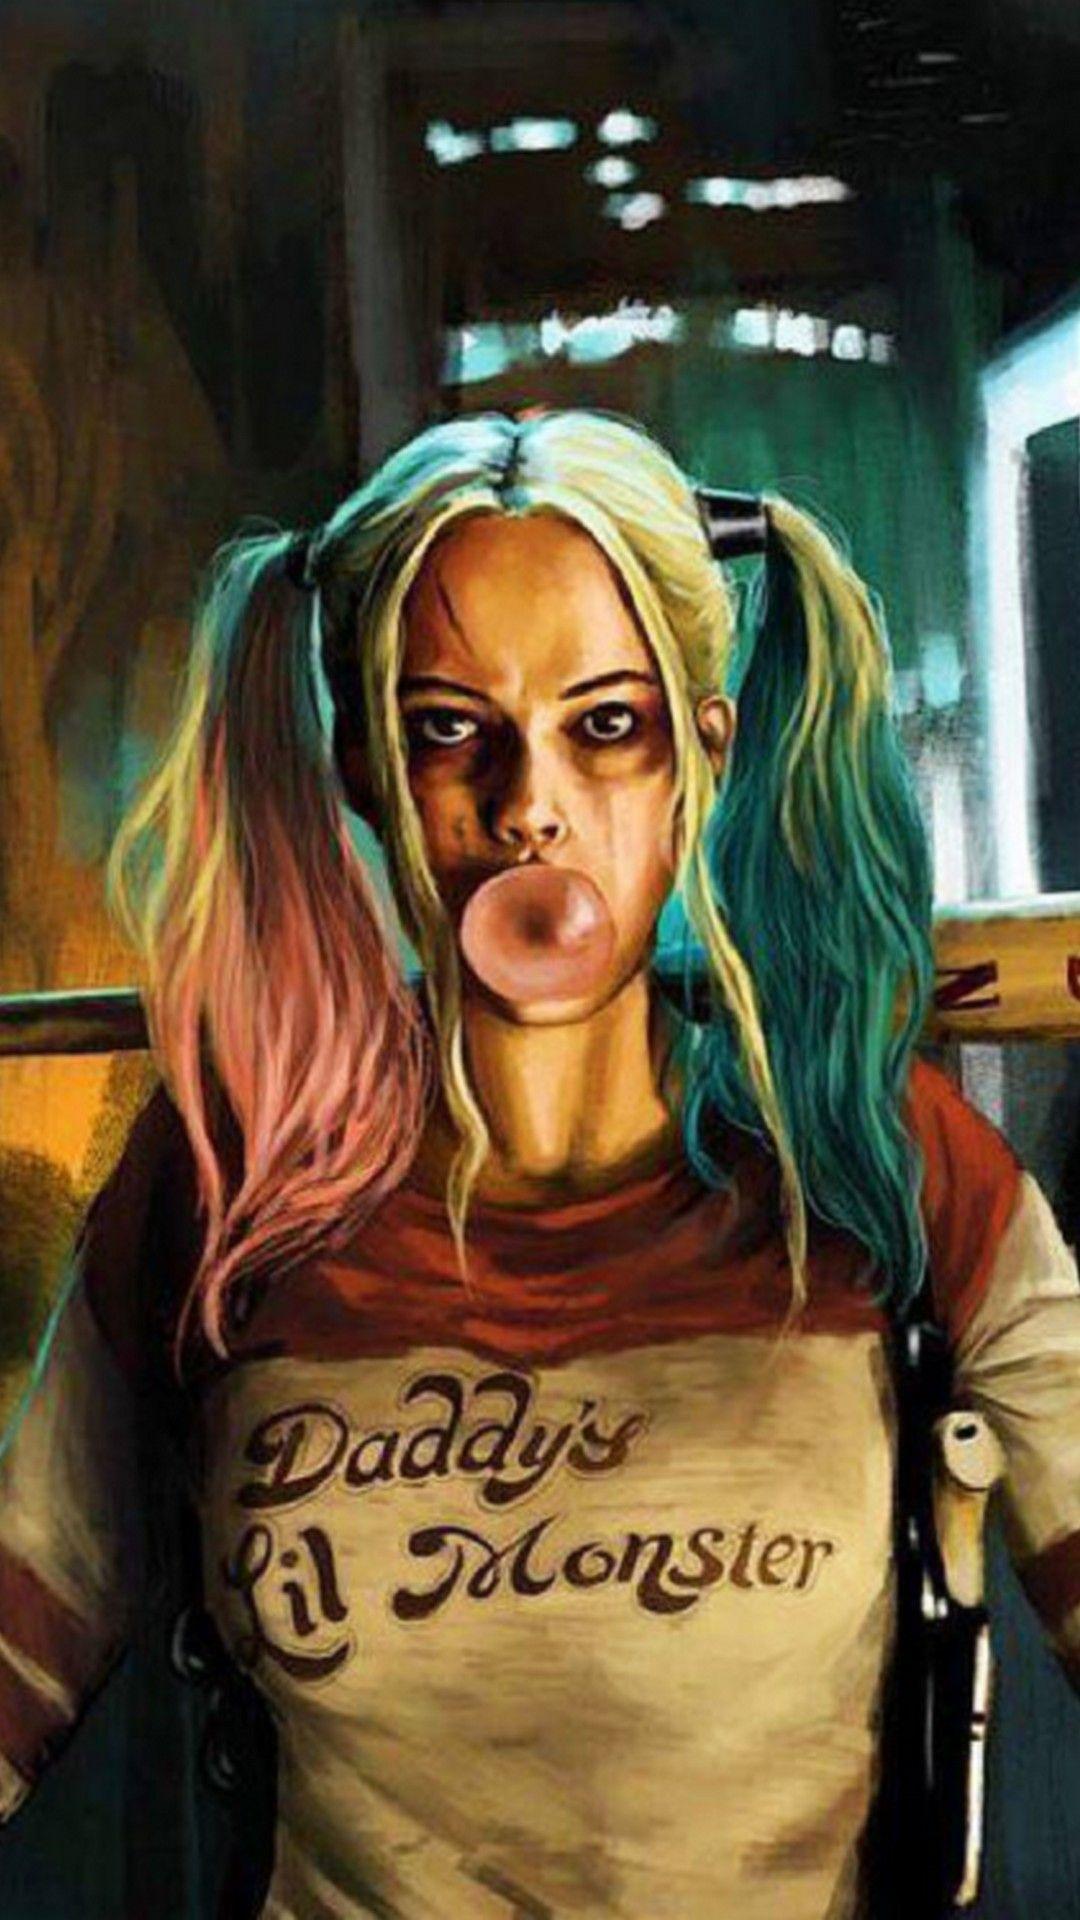 400 Harley Quinn HD Wallpapers and Backgrounds